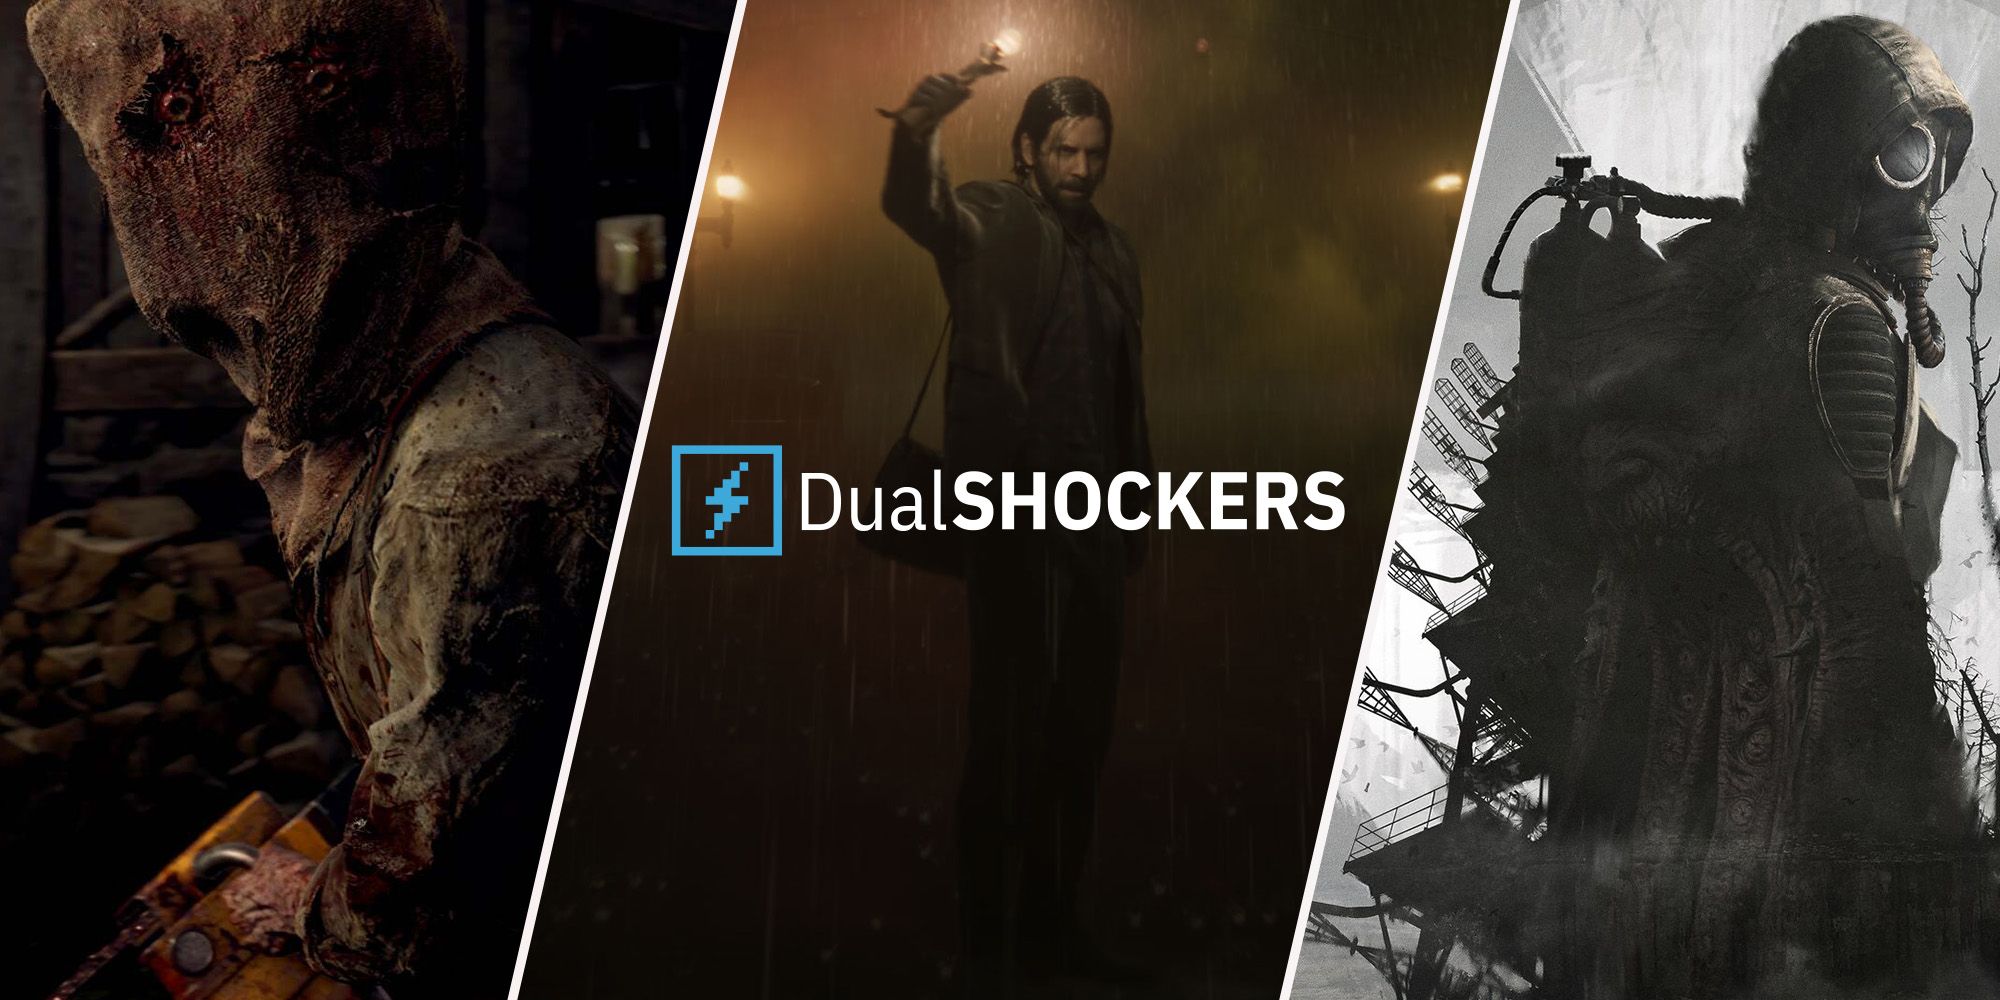 RE4 Remake, Alan Wake 2, and Stalker 2 promo images with DualShockers logo